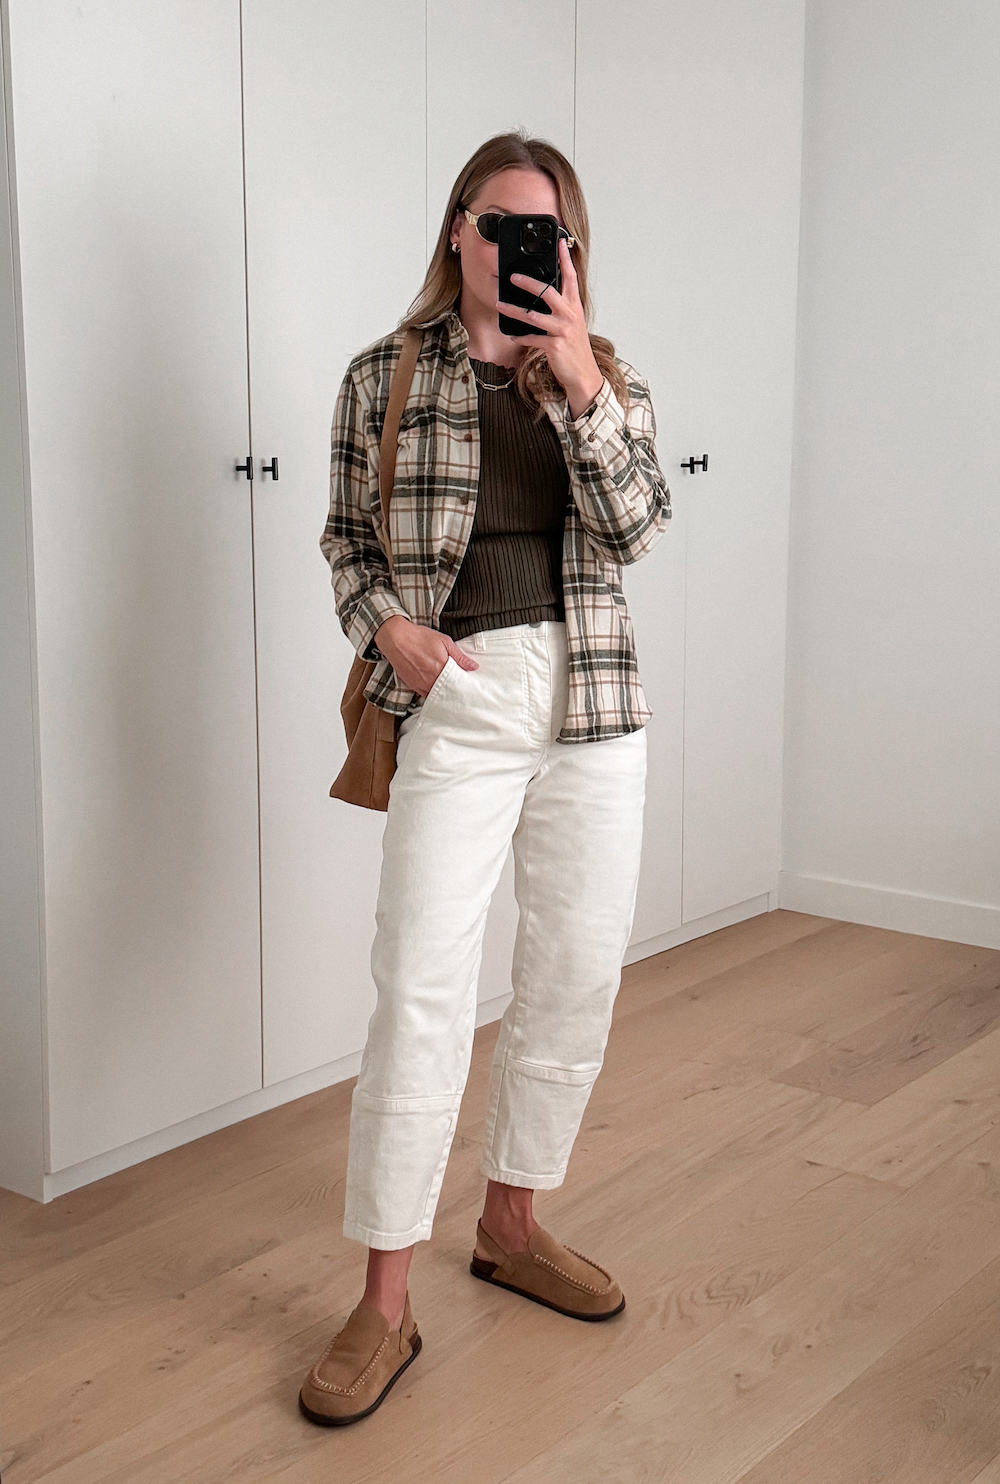 Christal wearing white cargo pants, a brown top and a flannel button down.